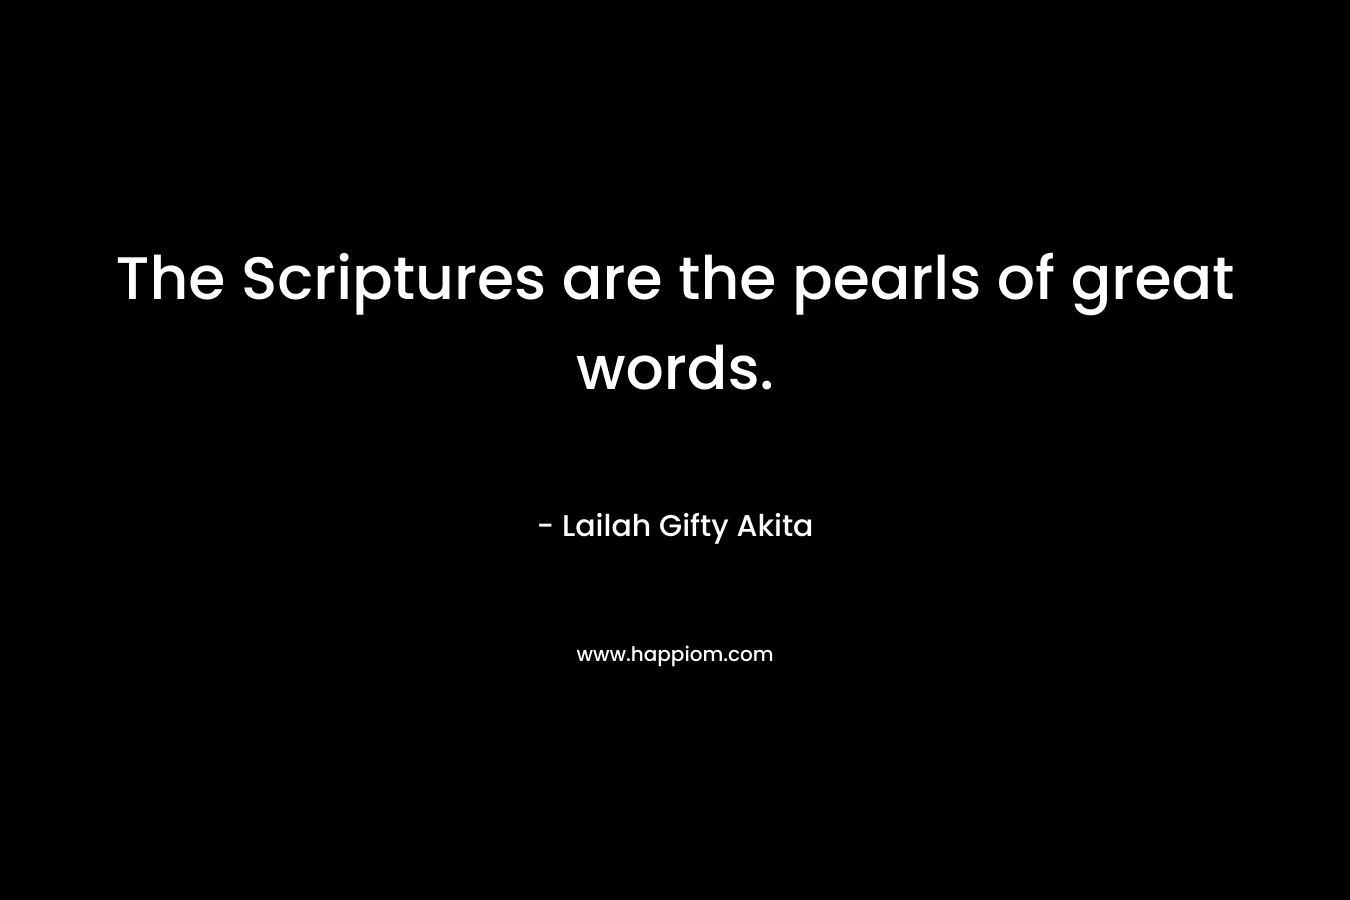 The Scriptures are the pearls of great words. – Lailah Gifty Akita